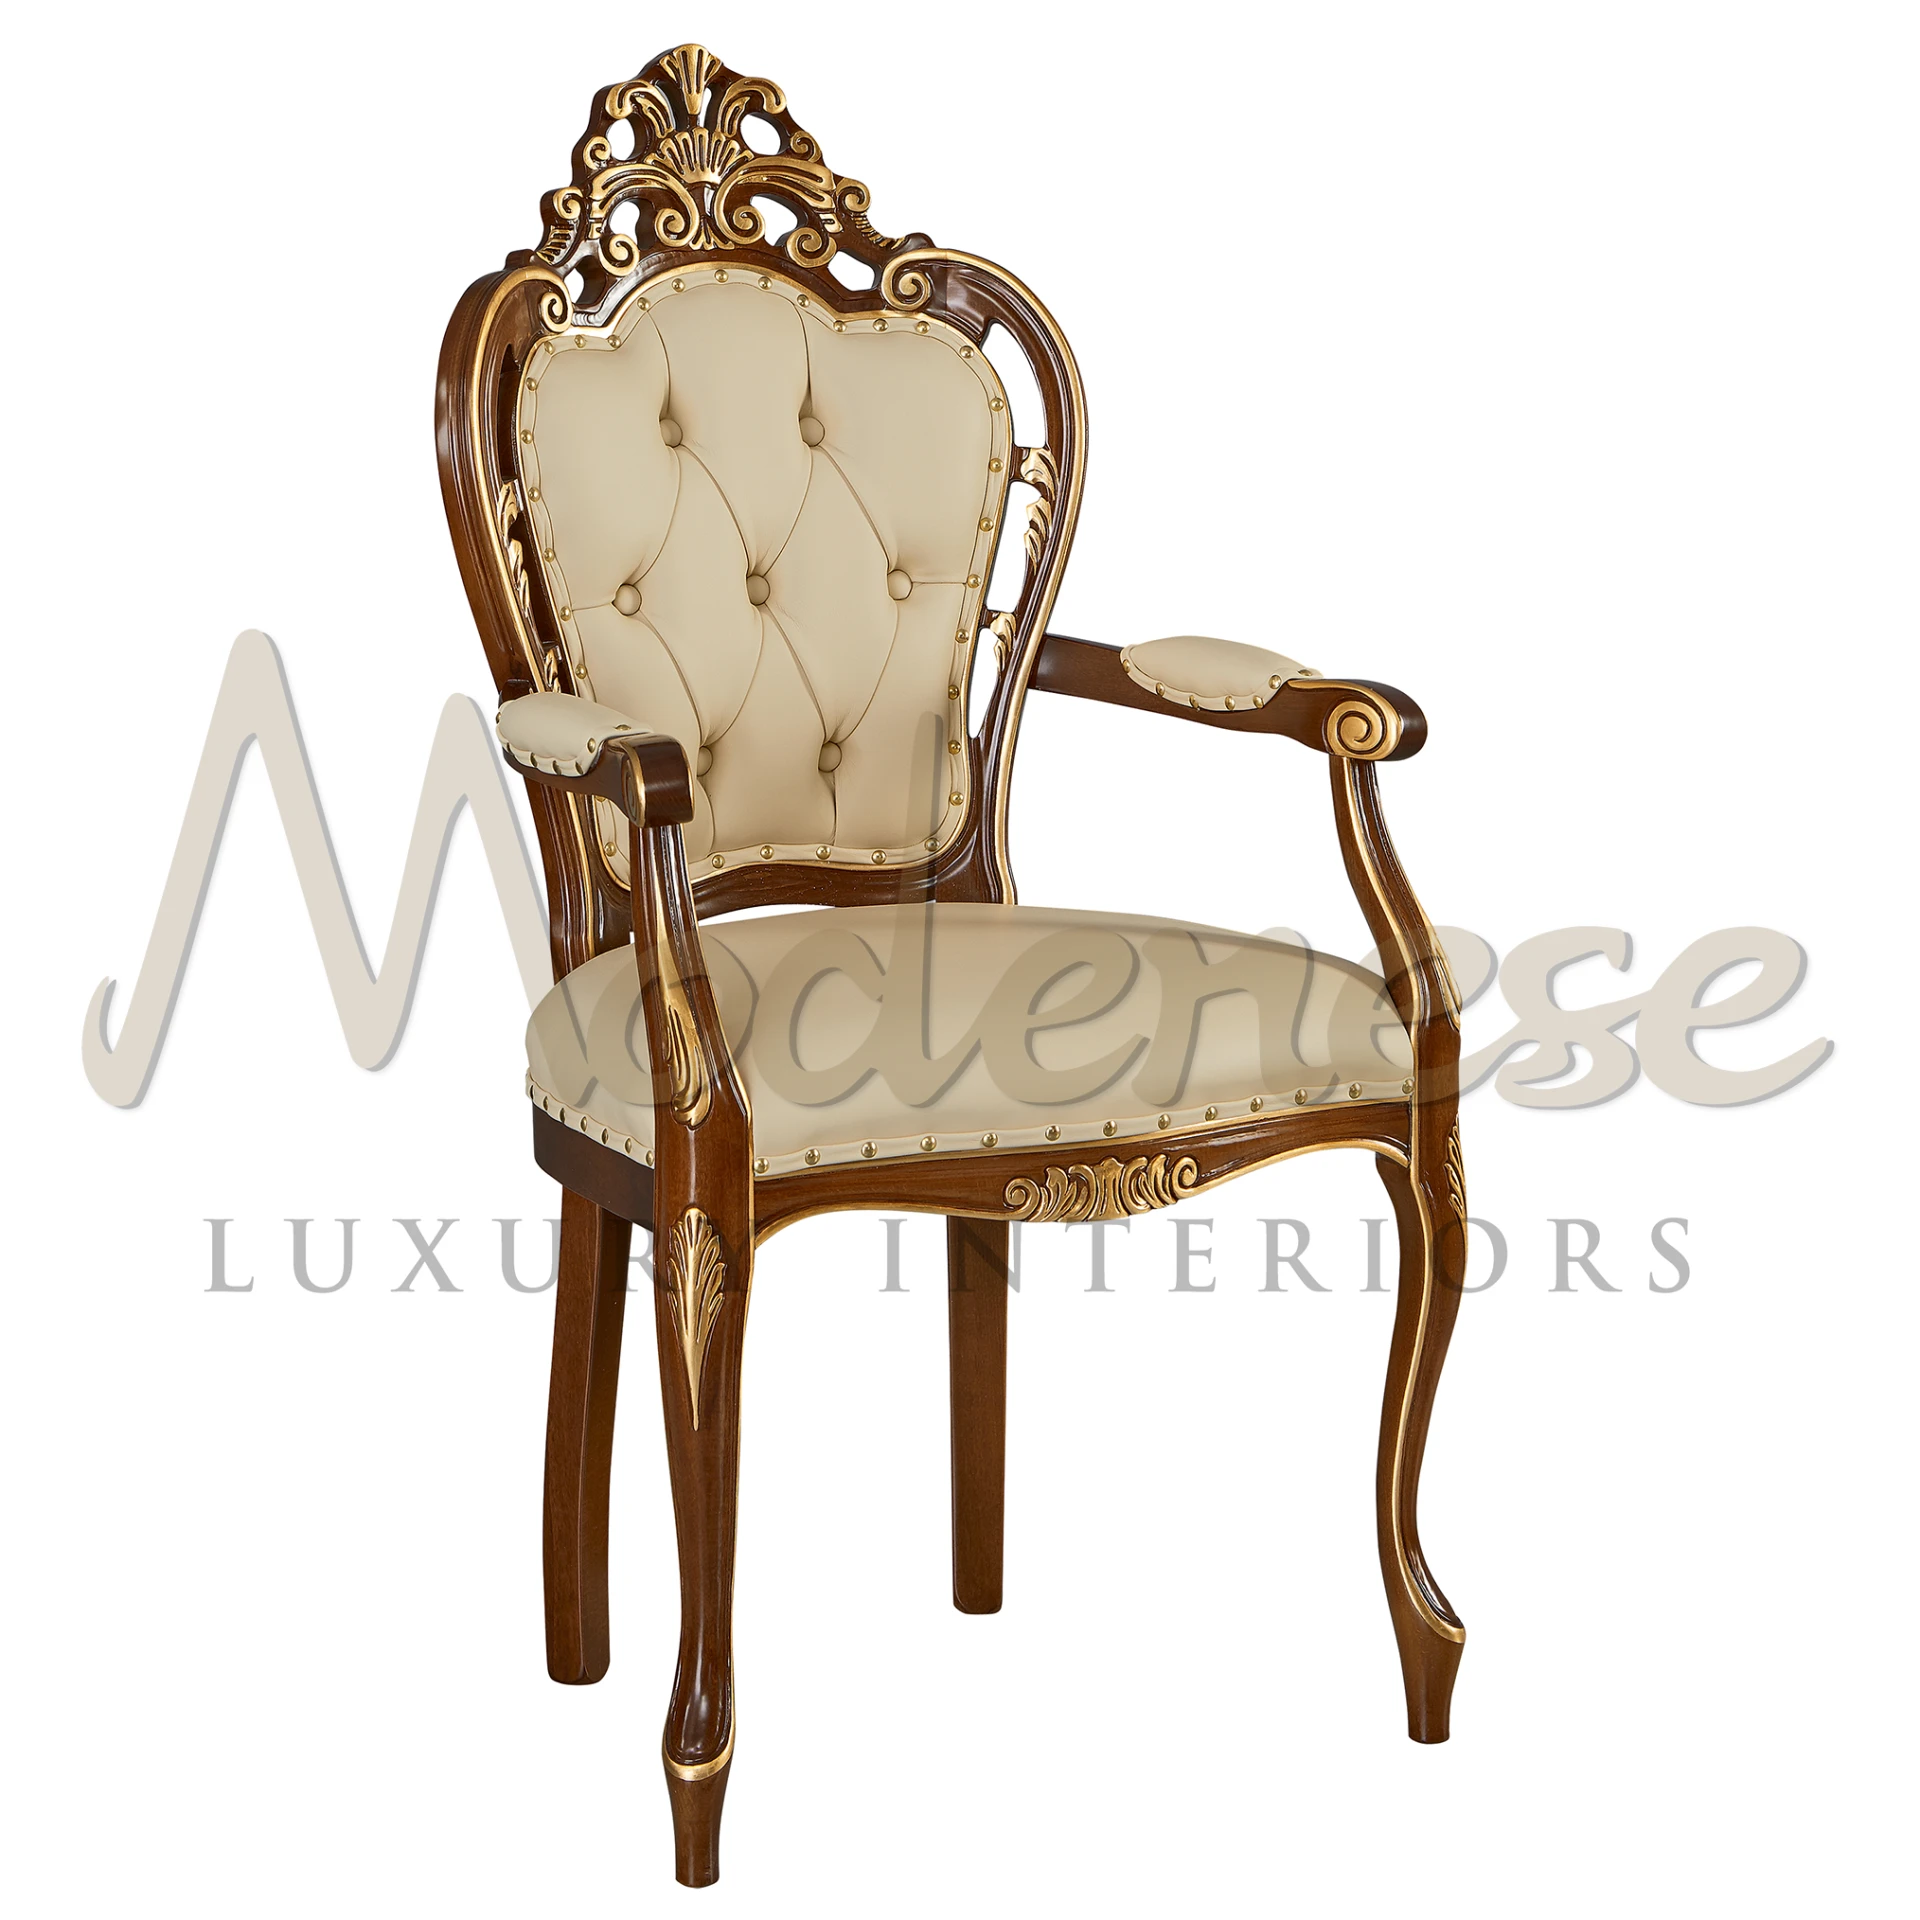 Renaissance Chair with Armrests a blend of tradition and luxury.